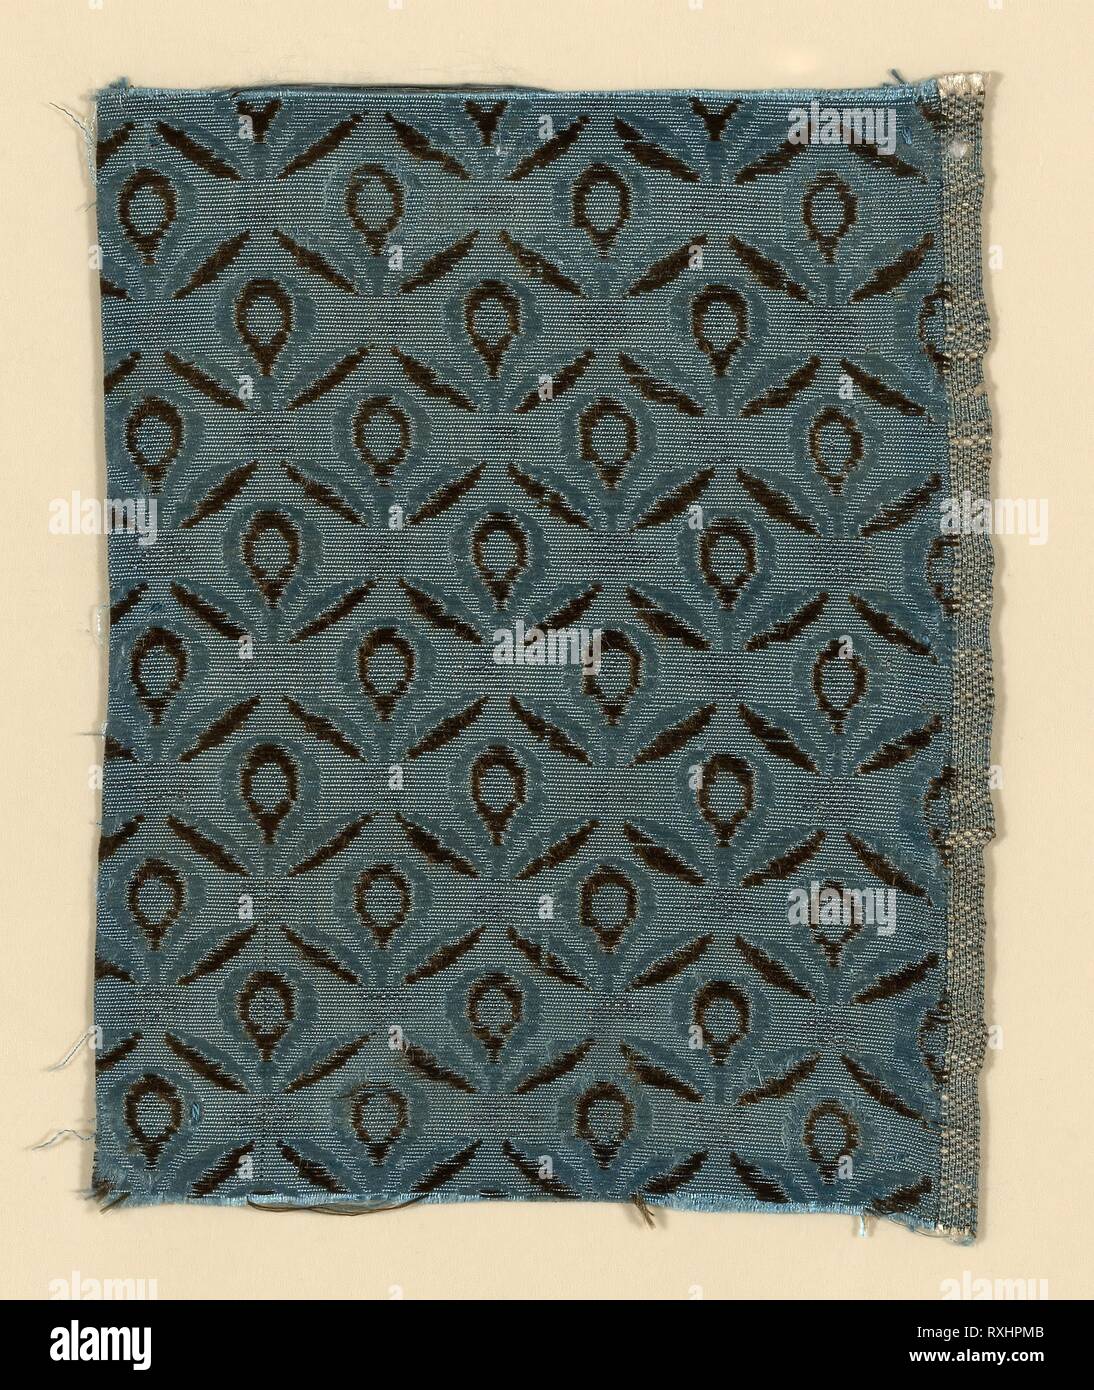 Fragment. Spain. Date: 1775-1800. Dimensions: 14 x 10.6 cm (5 1/2 x 4 3/16 in.)  Repeat: 2.9 x 2.6 cm (1 1/8 x 1 in.). Silk and silvered-metal strip, warp-faced weft-ribbed plain weave with supplementary patterning wefts. Origin: Spain. Museum: The Chicago Art Institute. Stock Photo